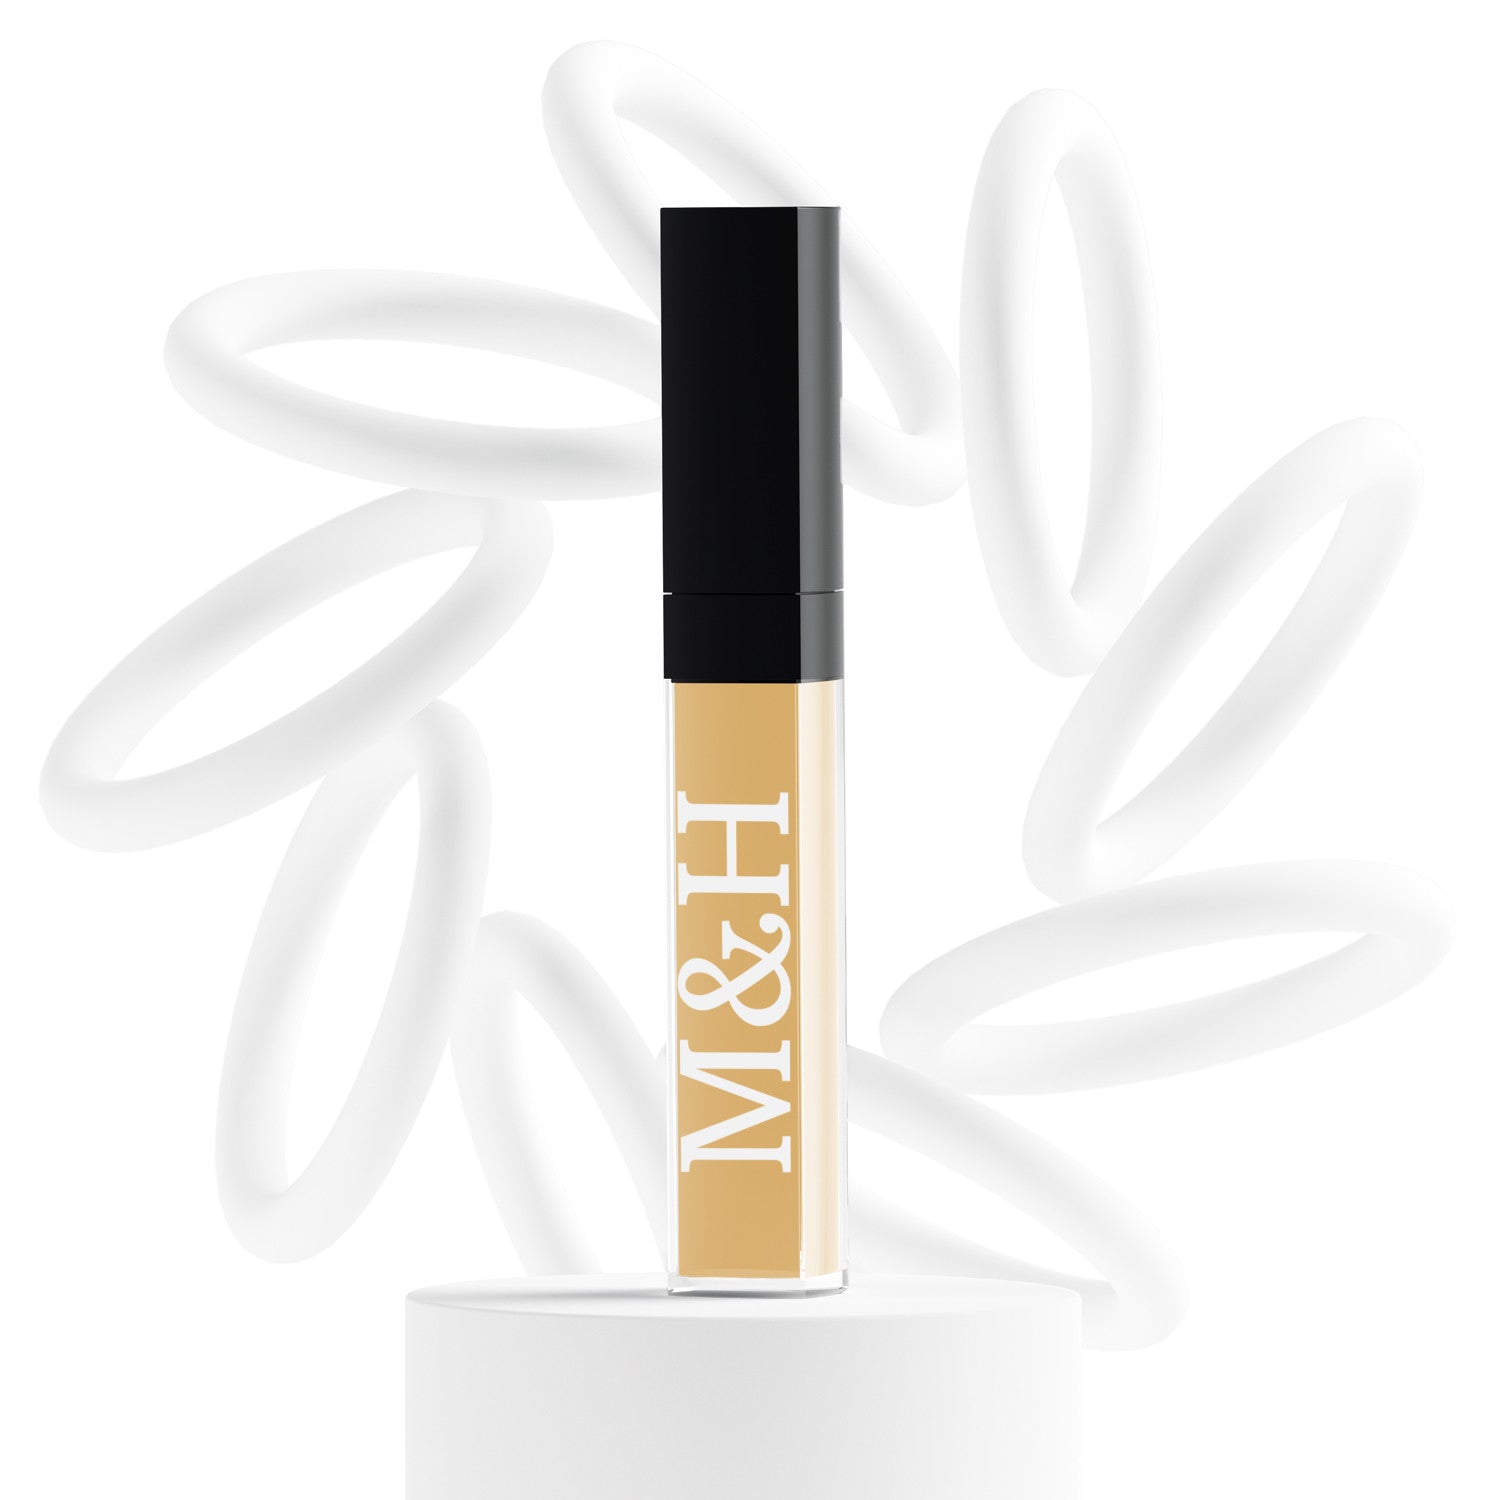 Cool-tone Concealers - M&H FashionCool-tone Concealersconcealer-coolM&H FashionM&H FashionConcealer-953Medium TanCool-tone ConcealersM&H Fashionconcealer-coolM&H Fashion This multifunctional concealer is designed to cover under-eye circles, complexion alterations, and major imperfections like scars, hyperpigmentation, burns, and tatCool-tone Concealers